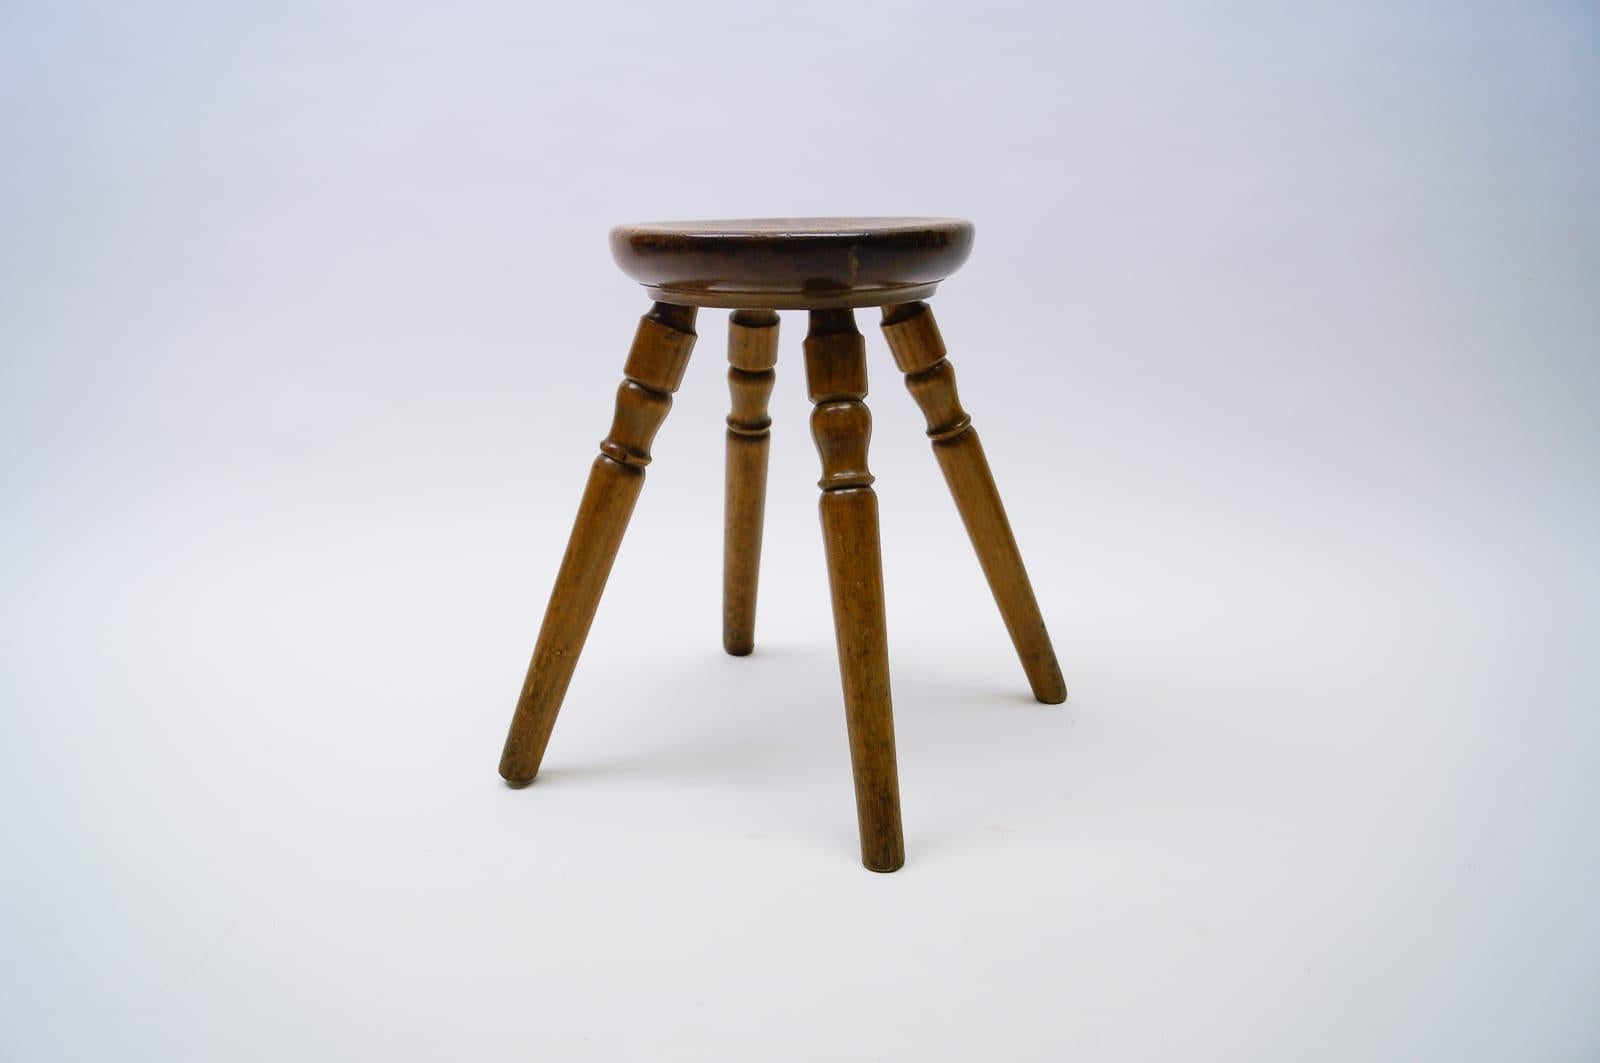 Mid-Century Modern French primitive 4-legs wooden stool, 1950s

Very good condition with very nice Patina.